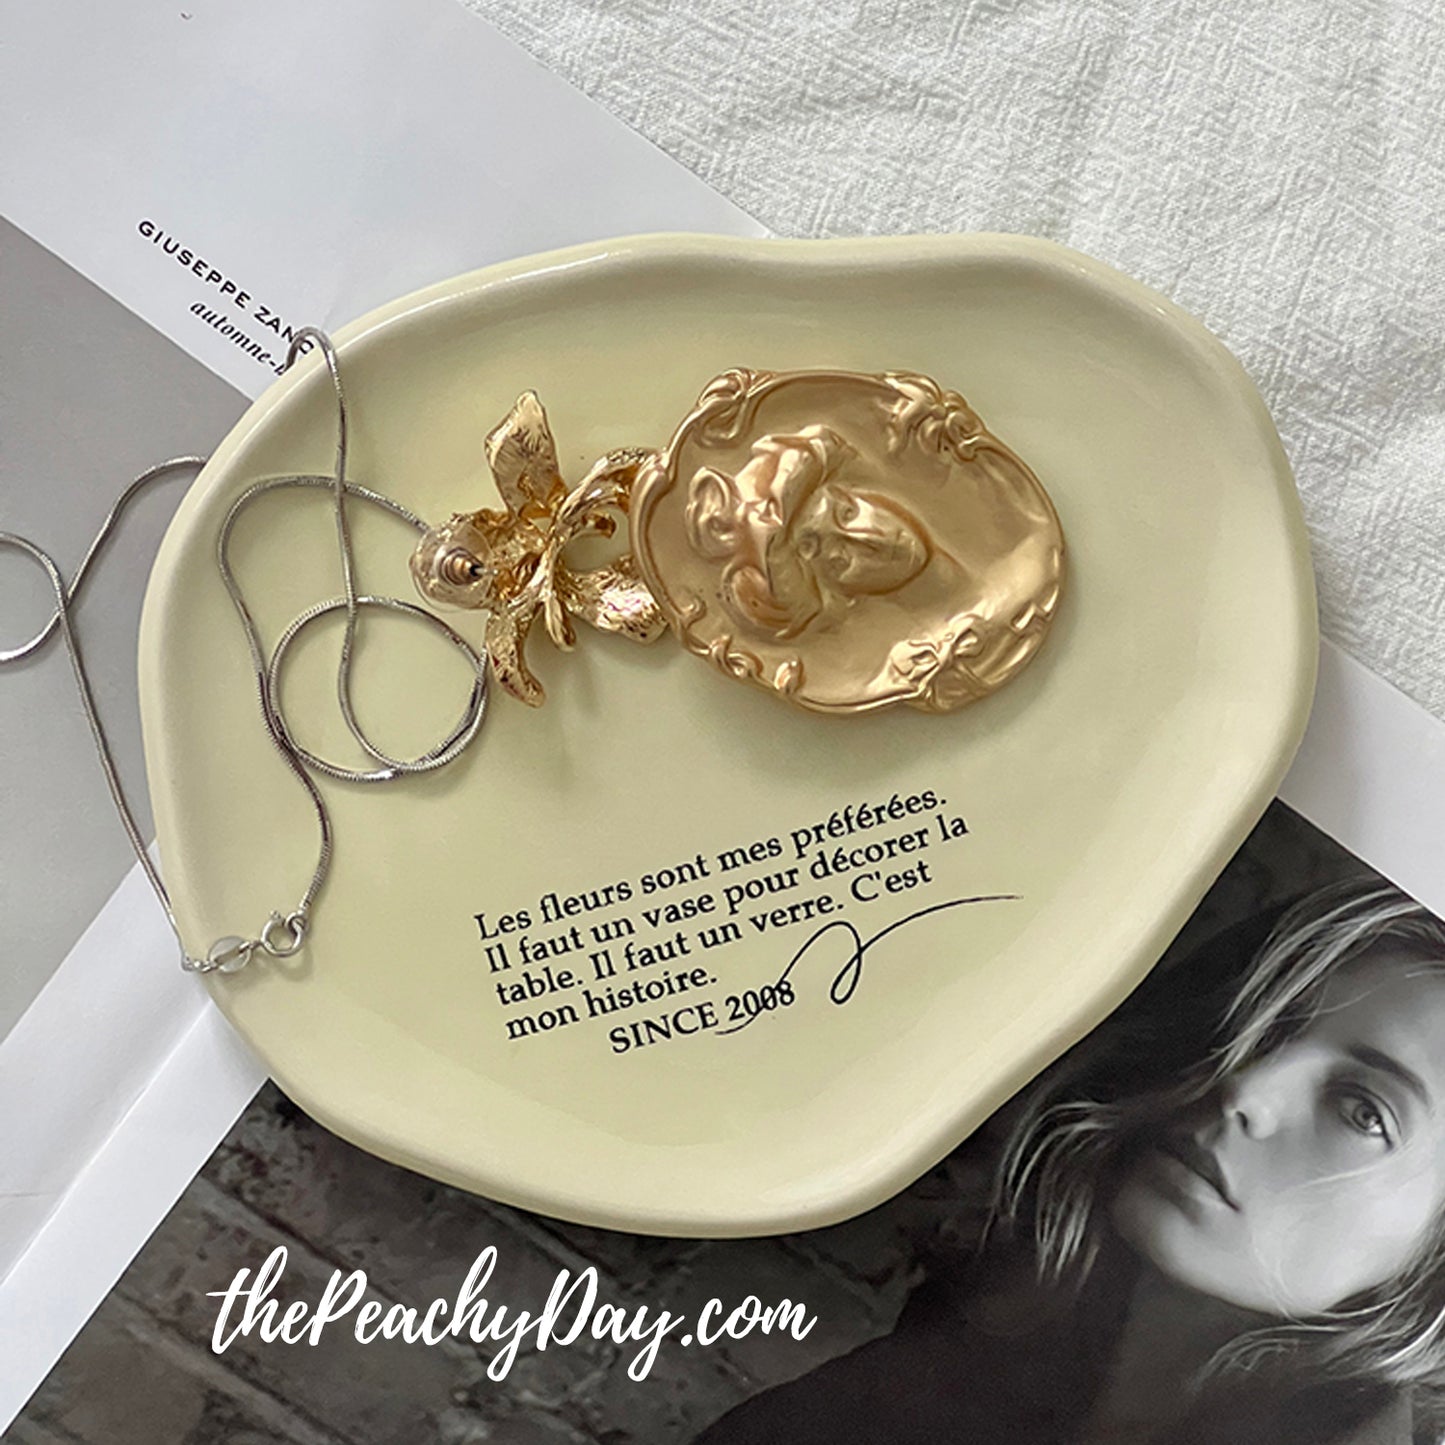 Ceramic Jewelry Tray, Decorative Trinket Dish for Rings Earrings Necklaces Bracelet Watch Keys Birthday Mother's Day Christmas Gift for Women